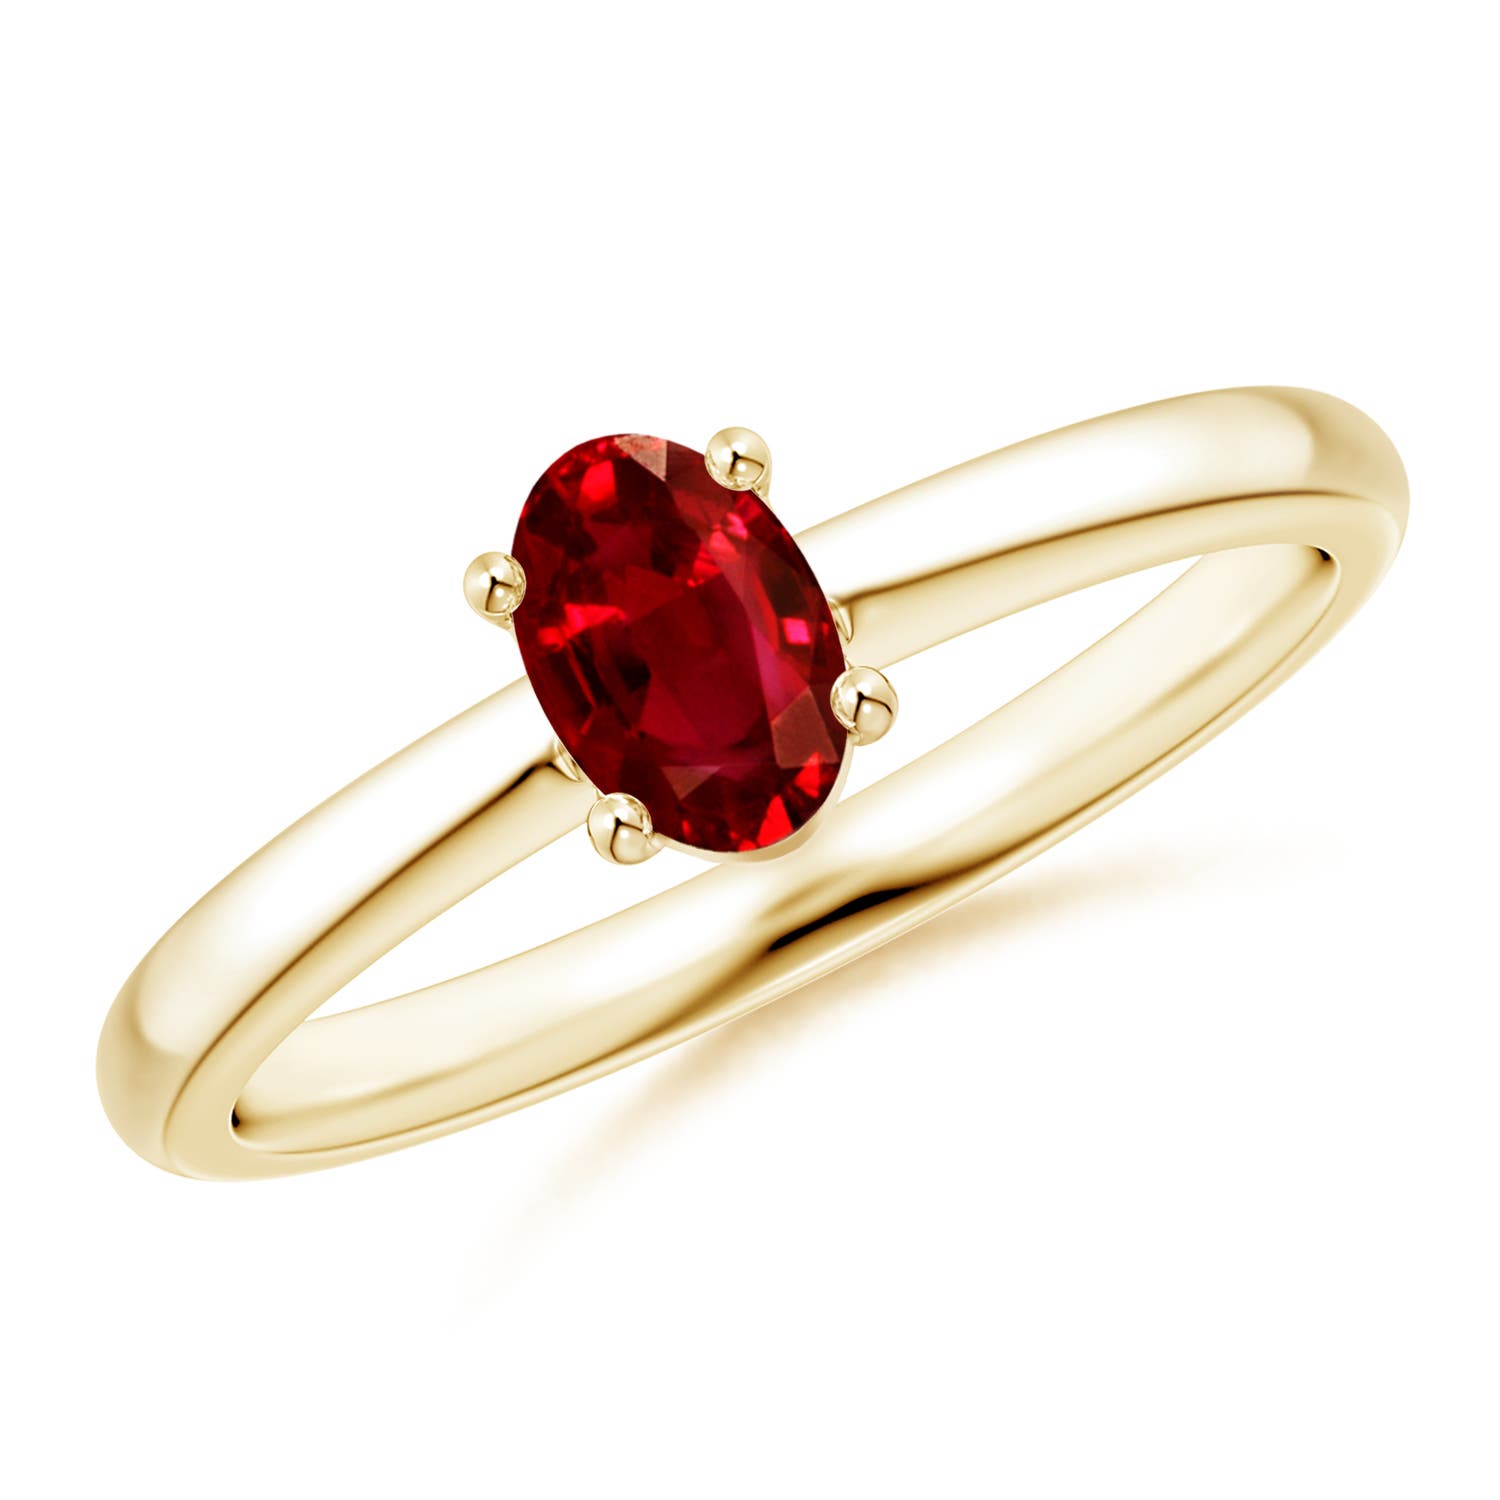 AAAA - Ruby / 0.6 CT / 14 KT Yellow Gold